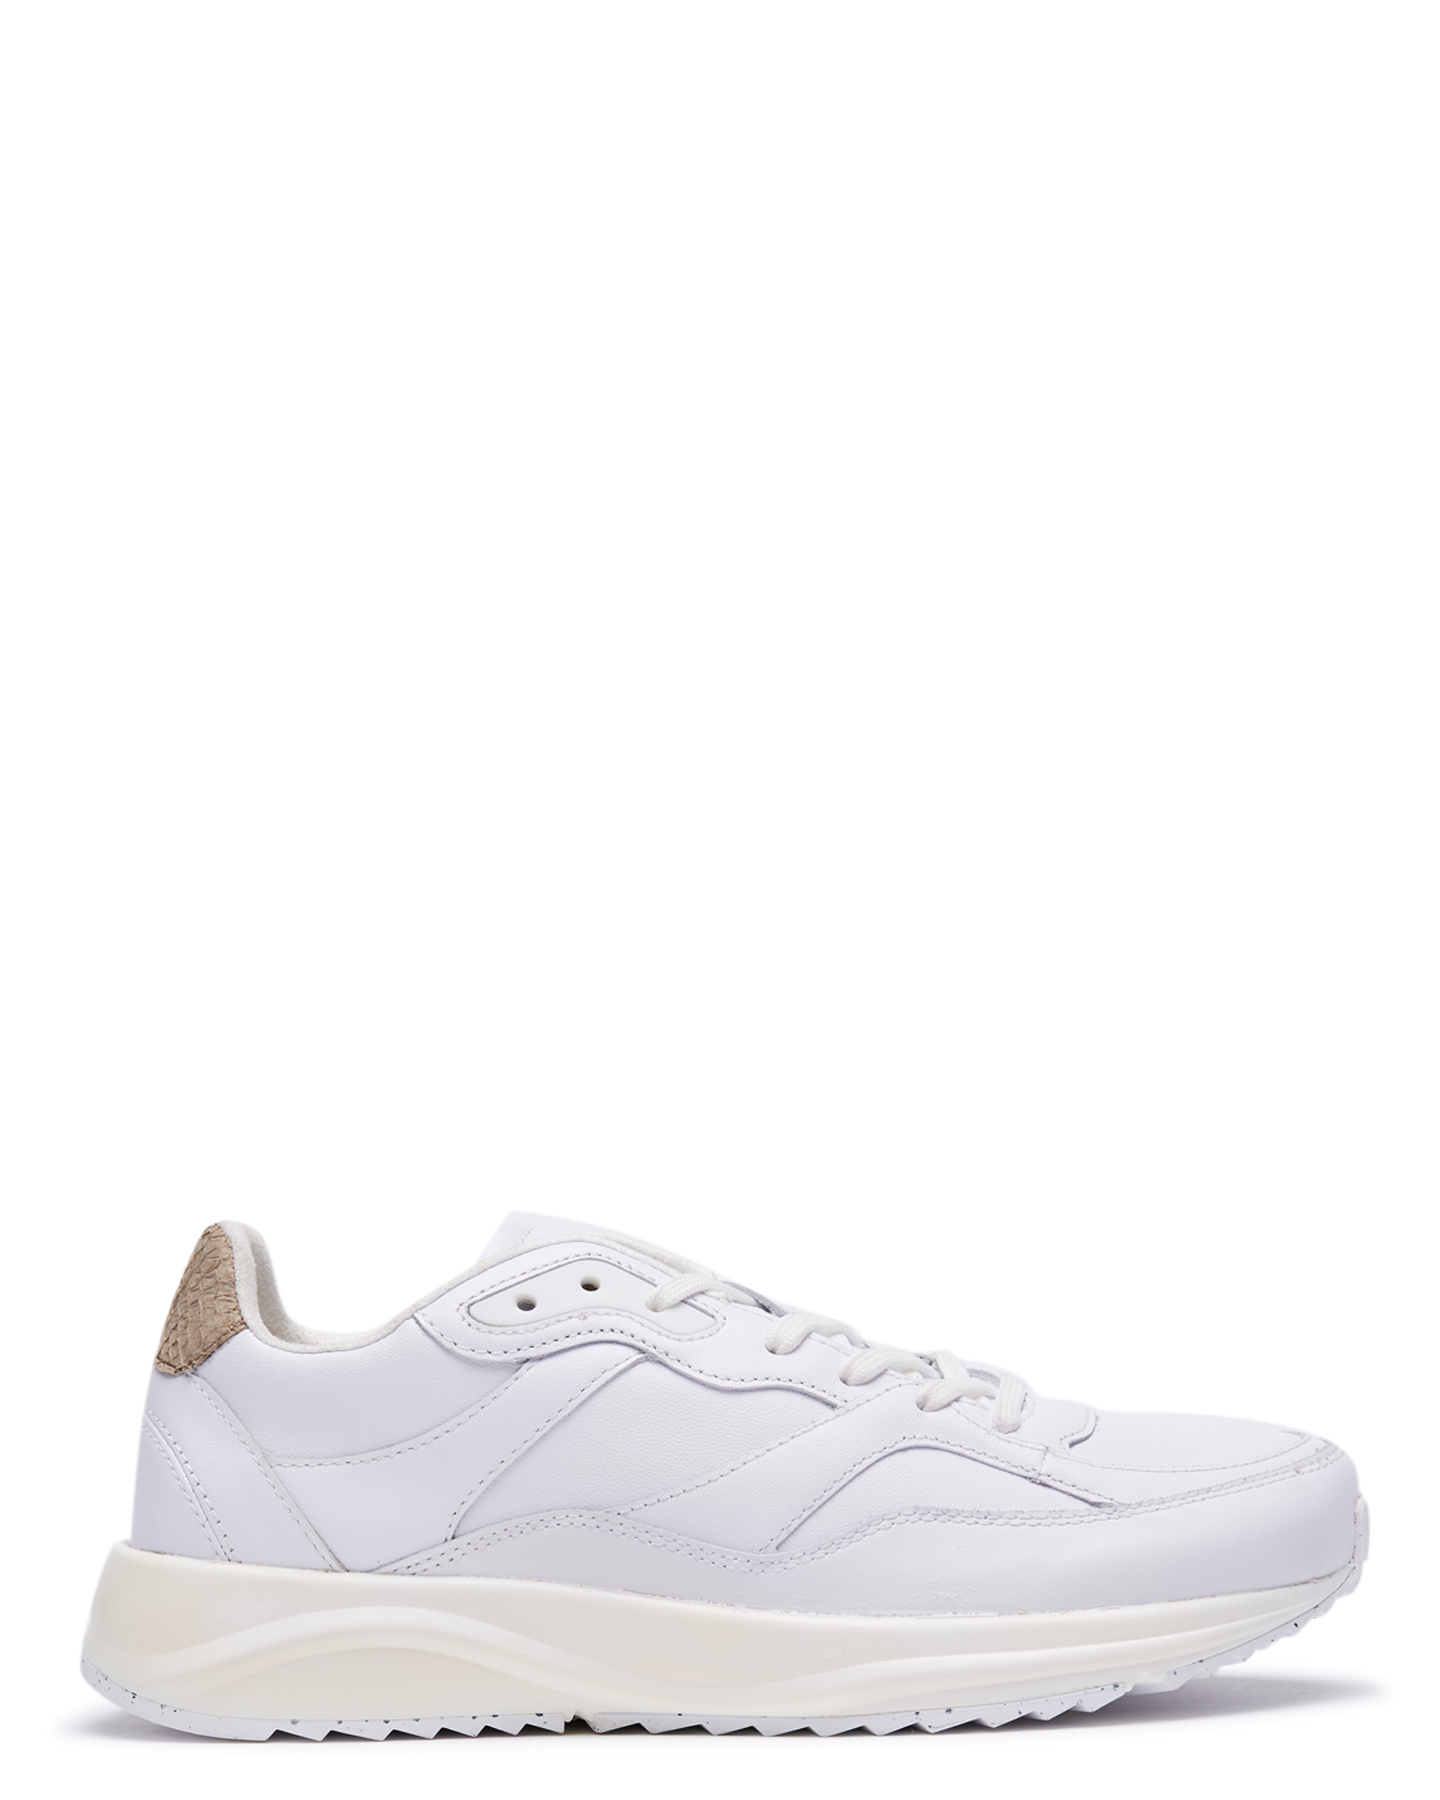 Woden Womens Sophie Leather Shoe - Bright White | SurfStitch